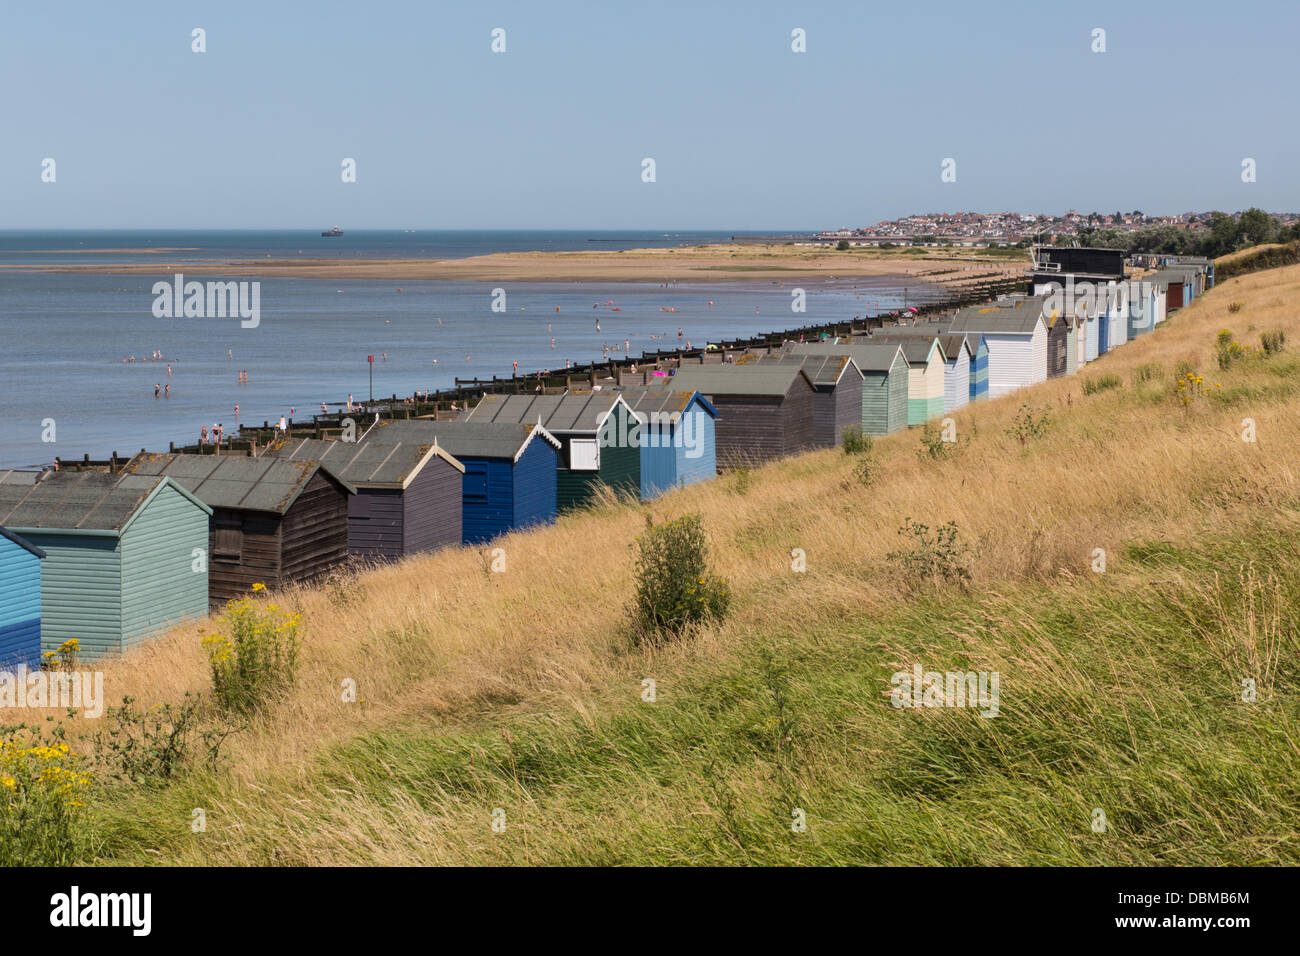 Whitsable, Kent, UK - Aug 1st, 2013: As temperatures soar tourists and locals head to the seafront in Tankerton, near Whitstable. Many choose to cool off in the shallow low tide water. Credit:  CBCK-Christine/Alamy Live News Stock Photo